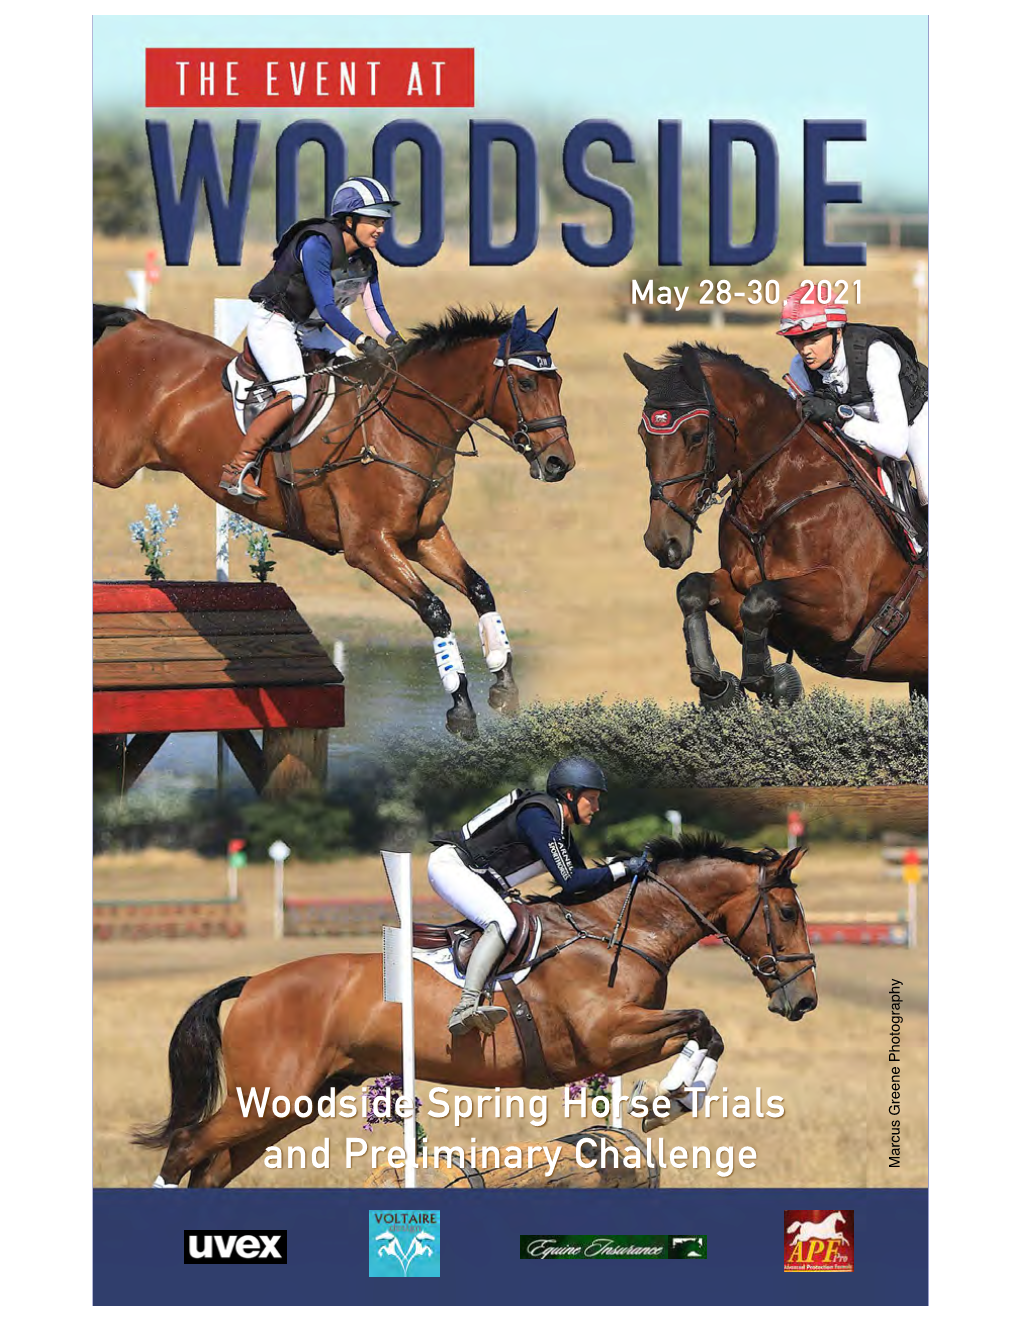 Woodside Spring Horse Trials and Preliminary Challenge